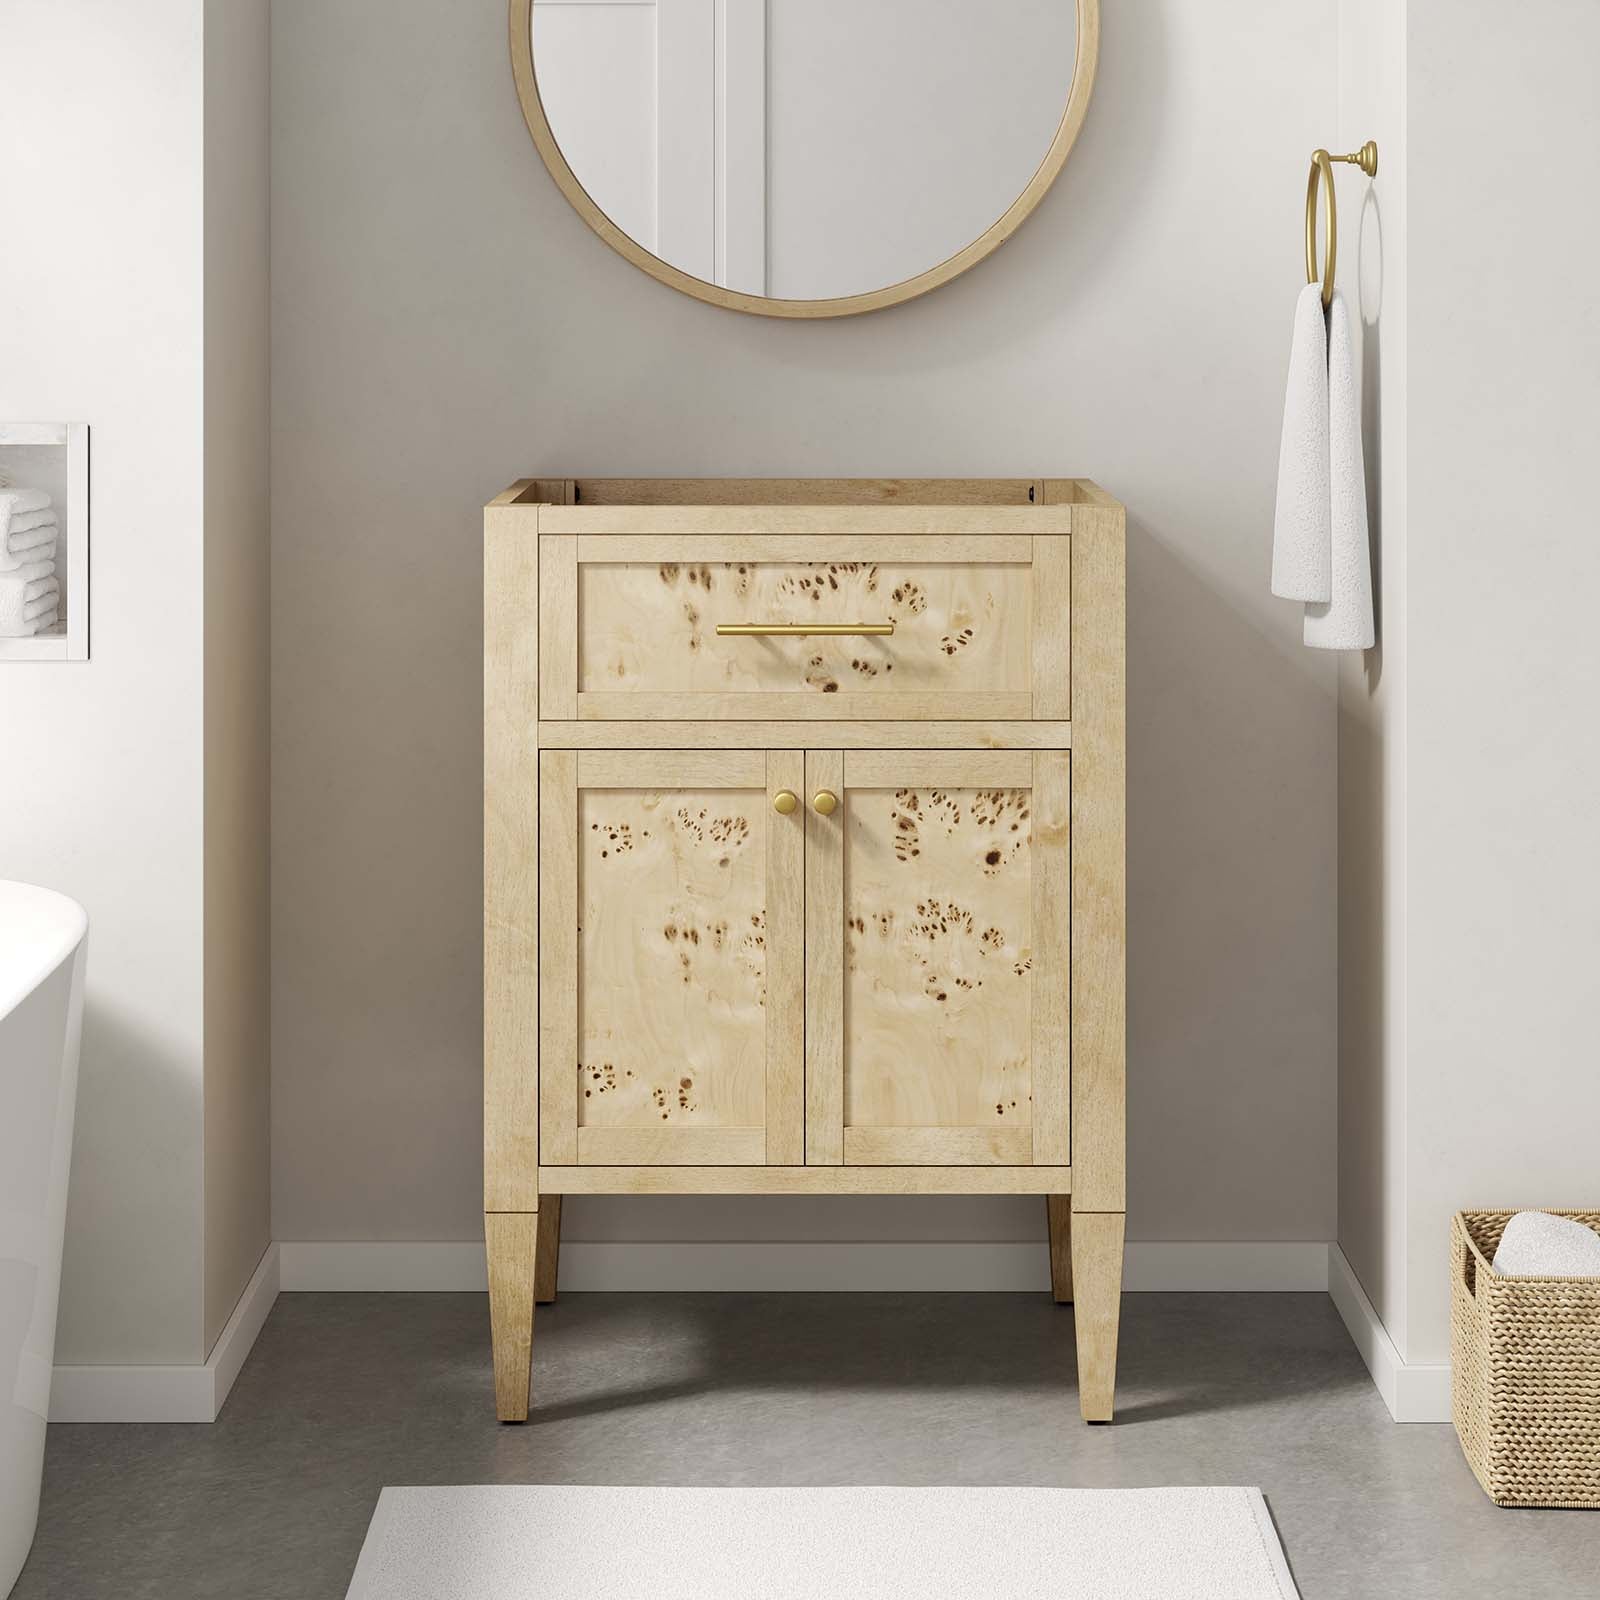 Elysian 24" Wood Bathroom Vanity Cabinet (Sink Basin Not Included) By Modway - EEI-6137 | Bathroom Accessories | Modway - 11